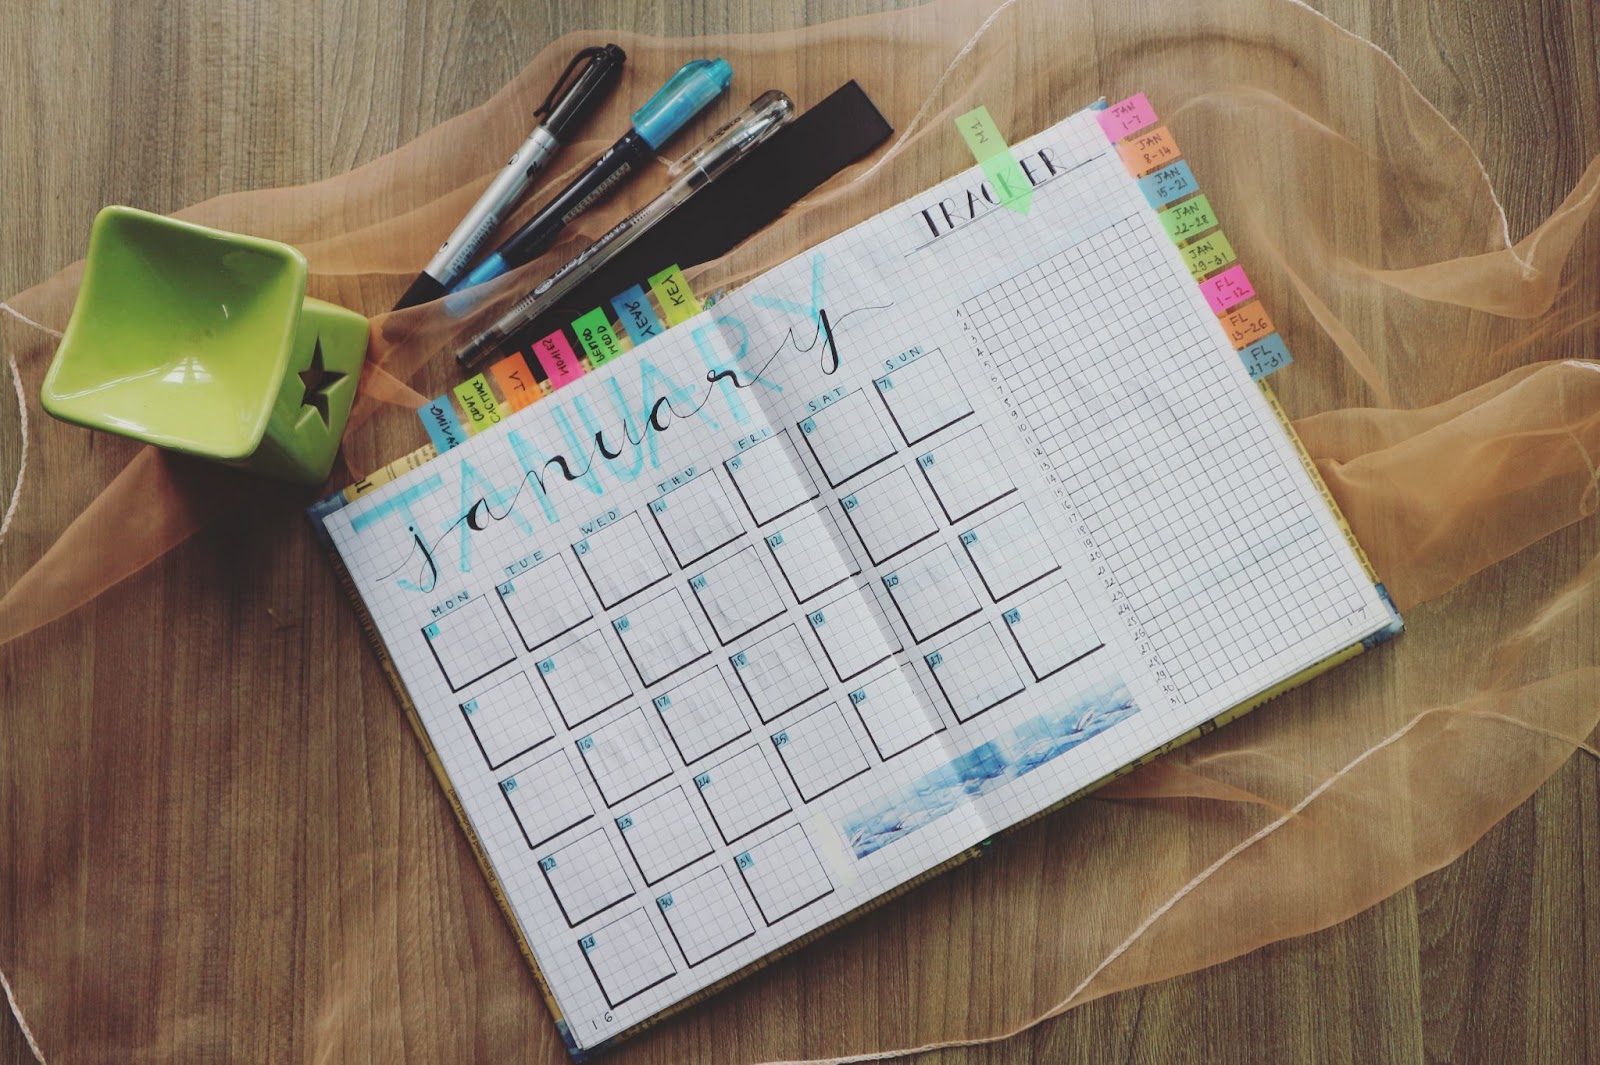 Yearly planners are one of the best gifts for an organized person